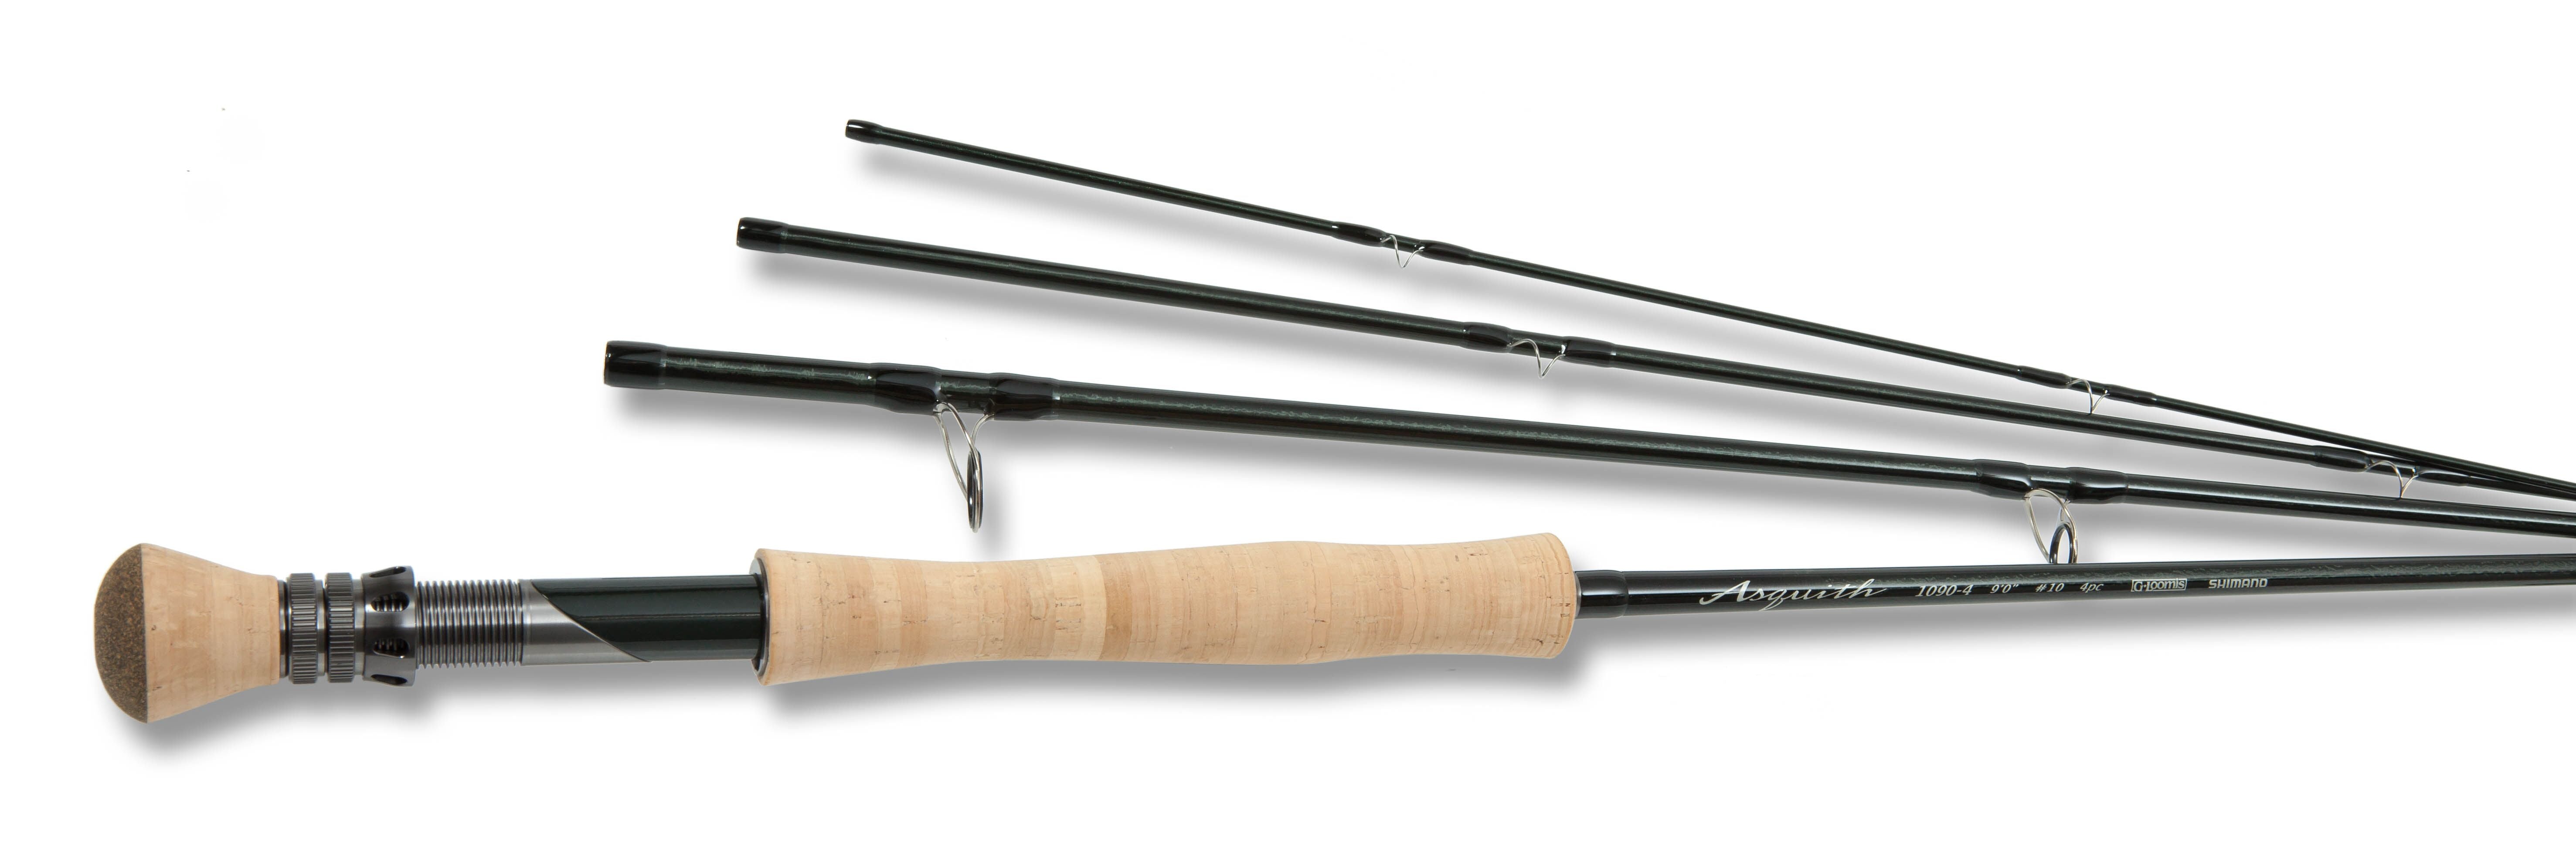 ECHO DH7130 7wt-13' Spey rod, with an ECHO ION 10/12wt reel